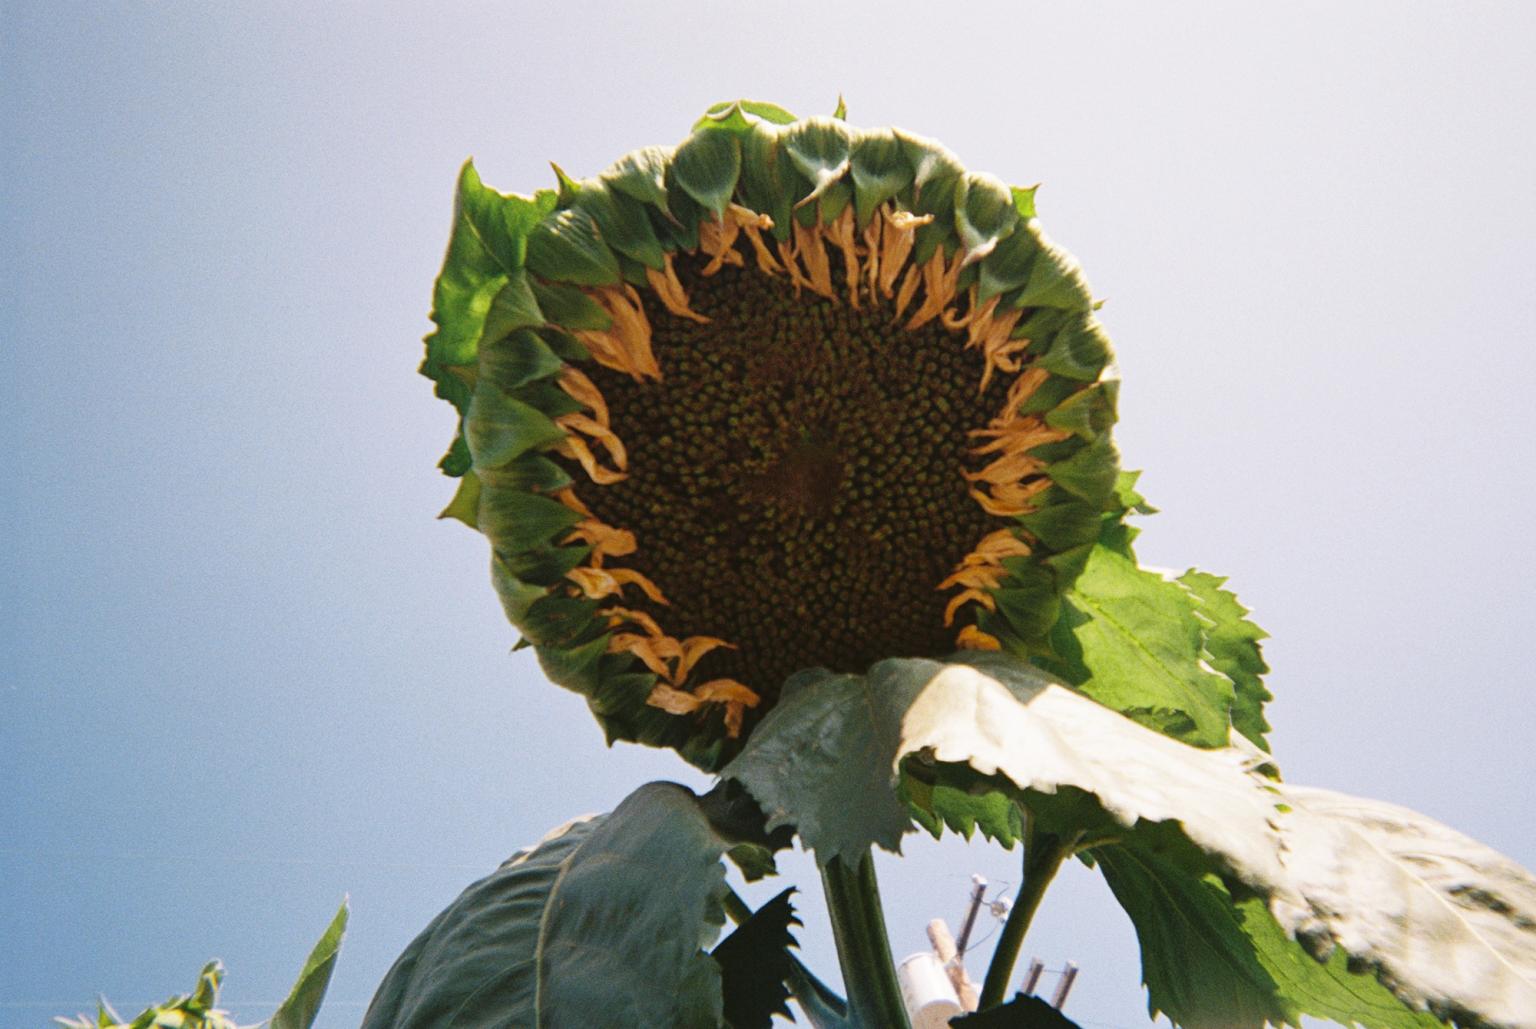 View of a big sunflower head with withered yellow petals, with a blue sky behind it.